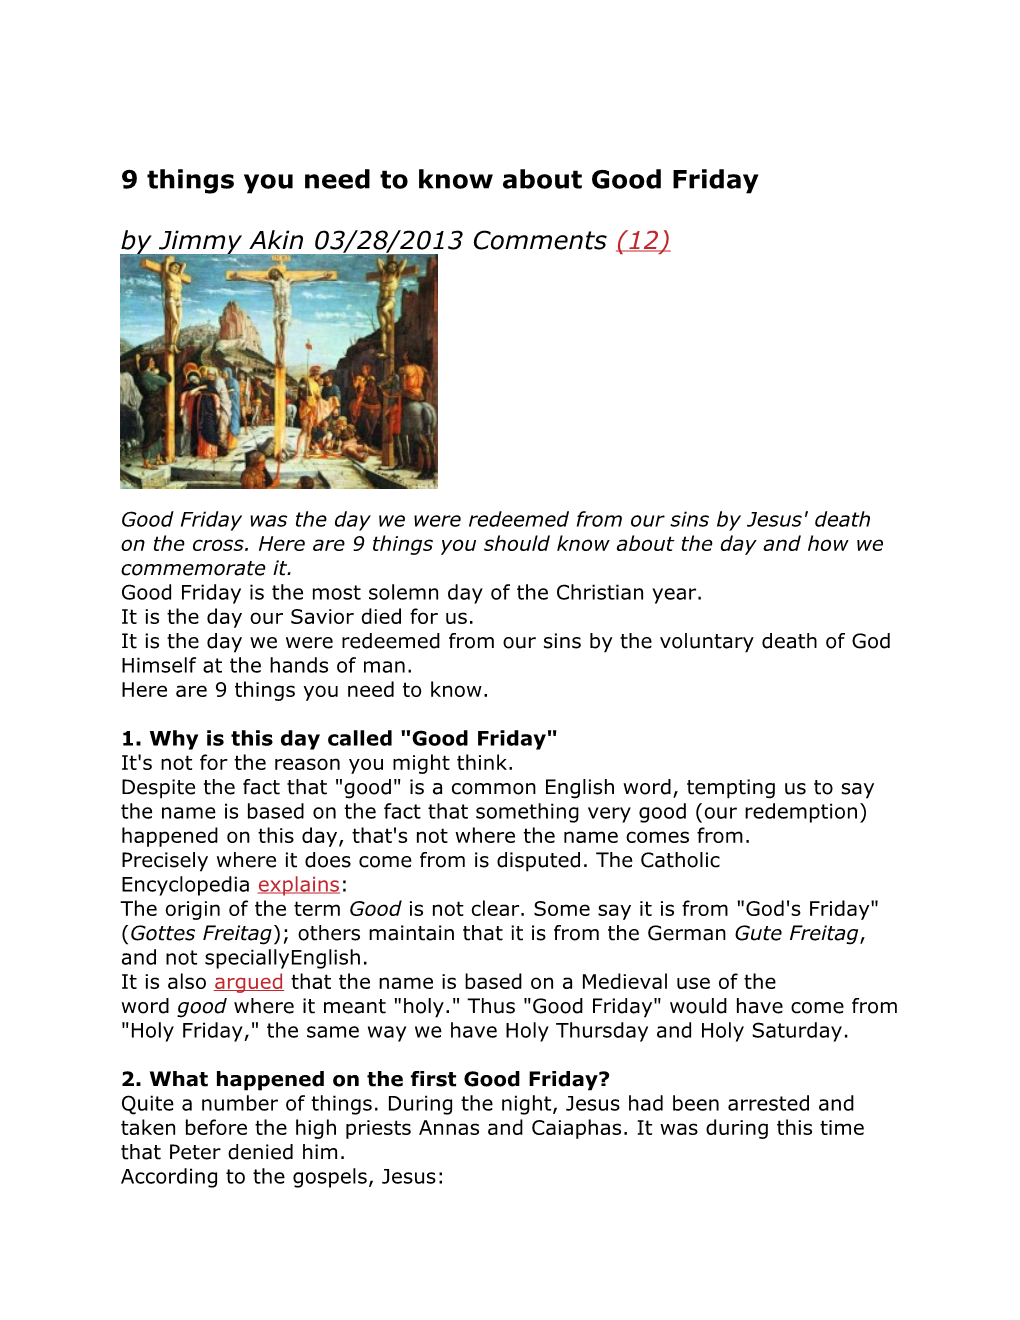 9 Things You Need to Know About Good Friday